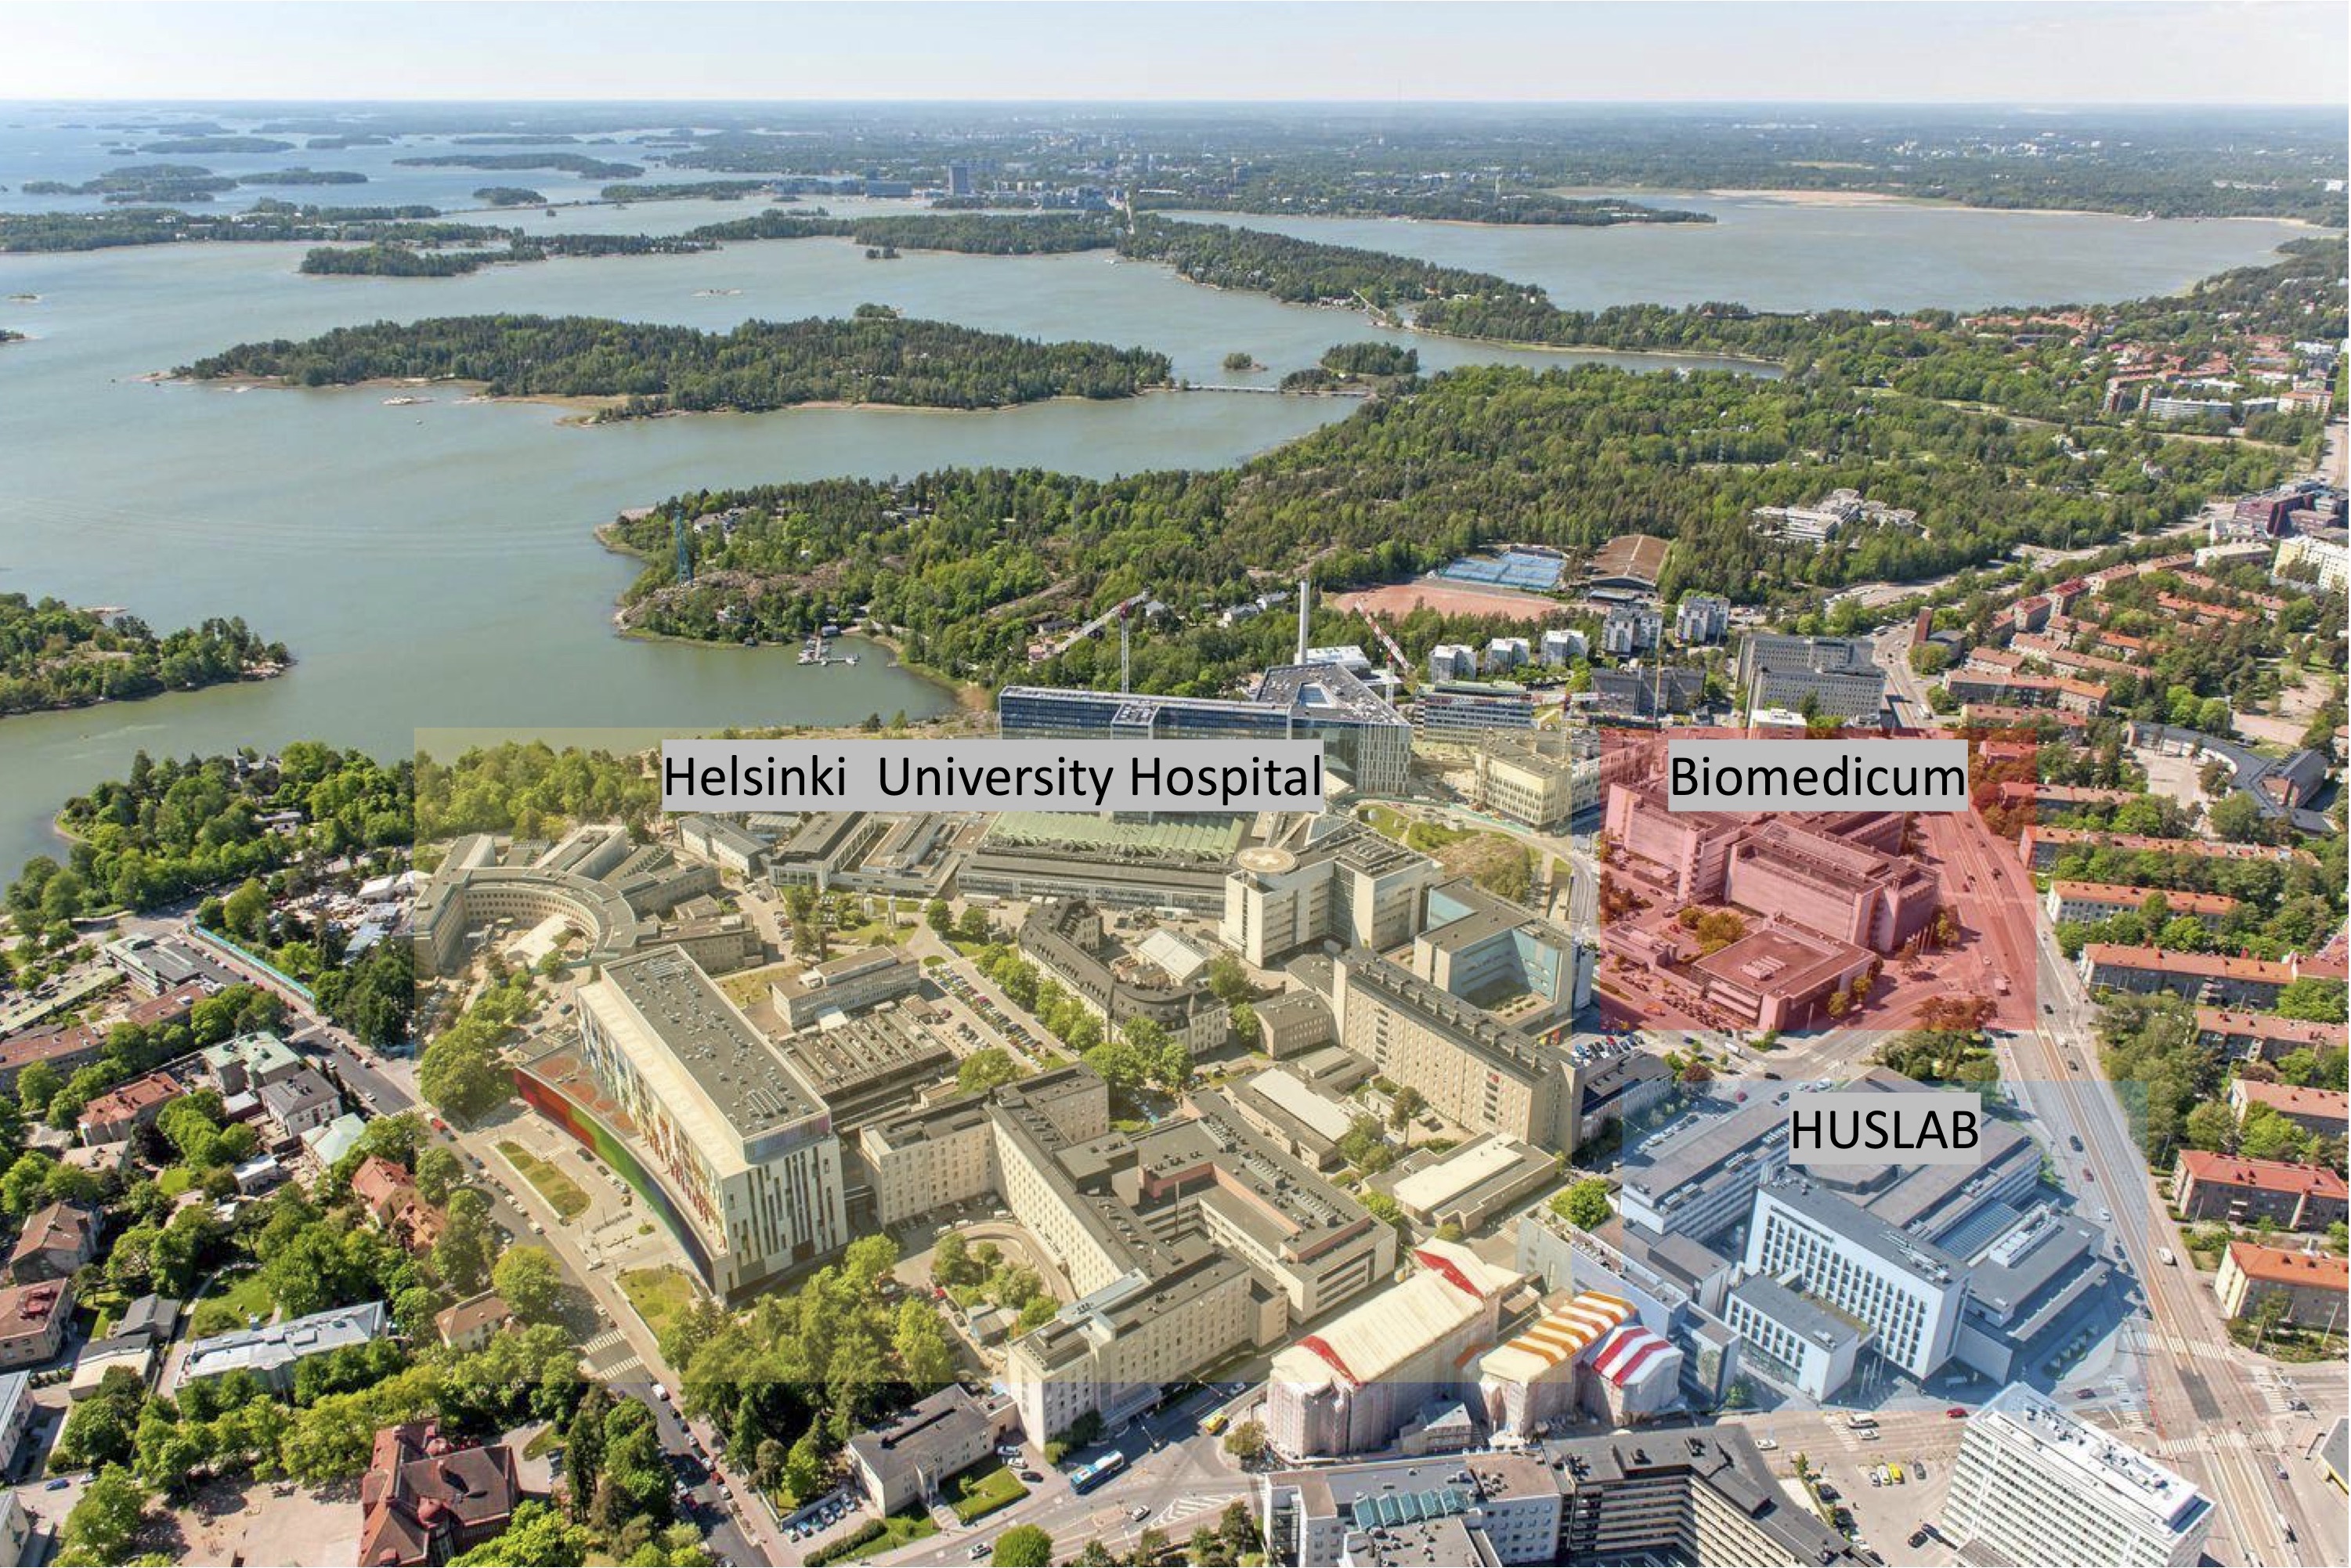 The Meilahti Clinical & Science HUB